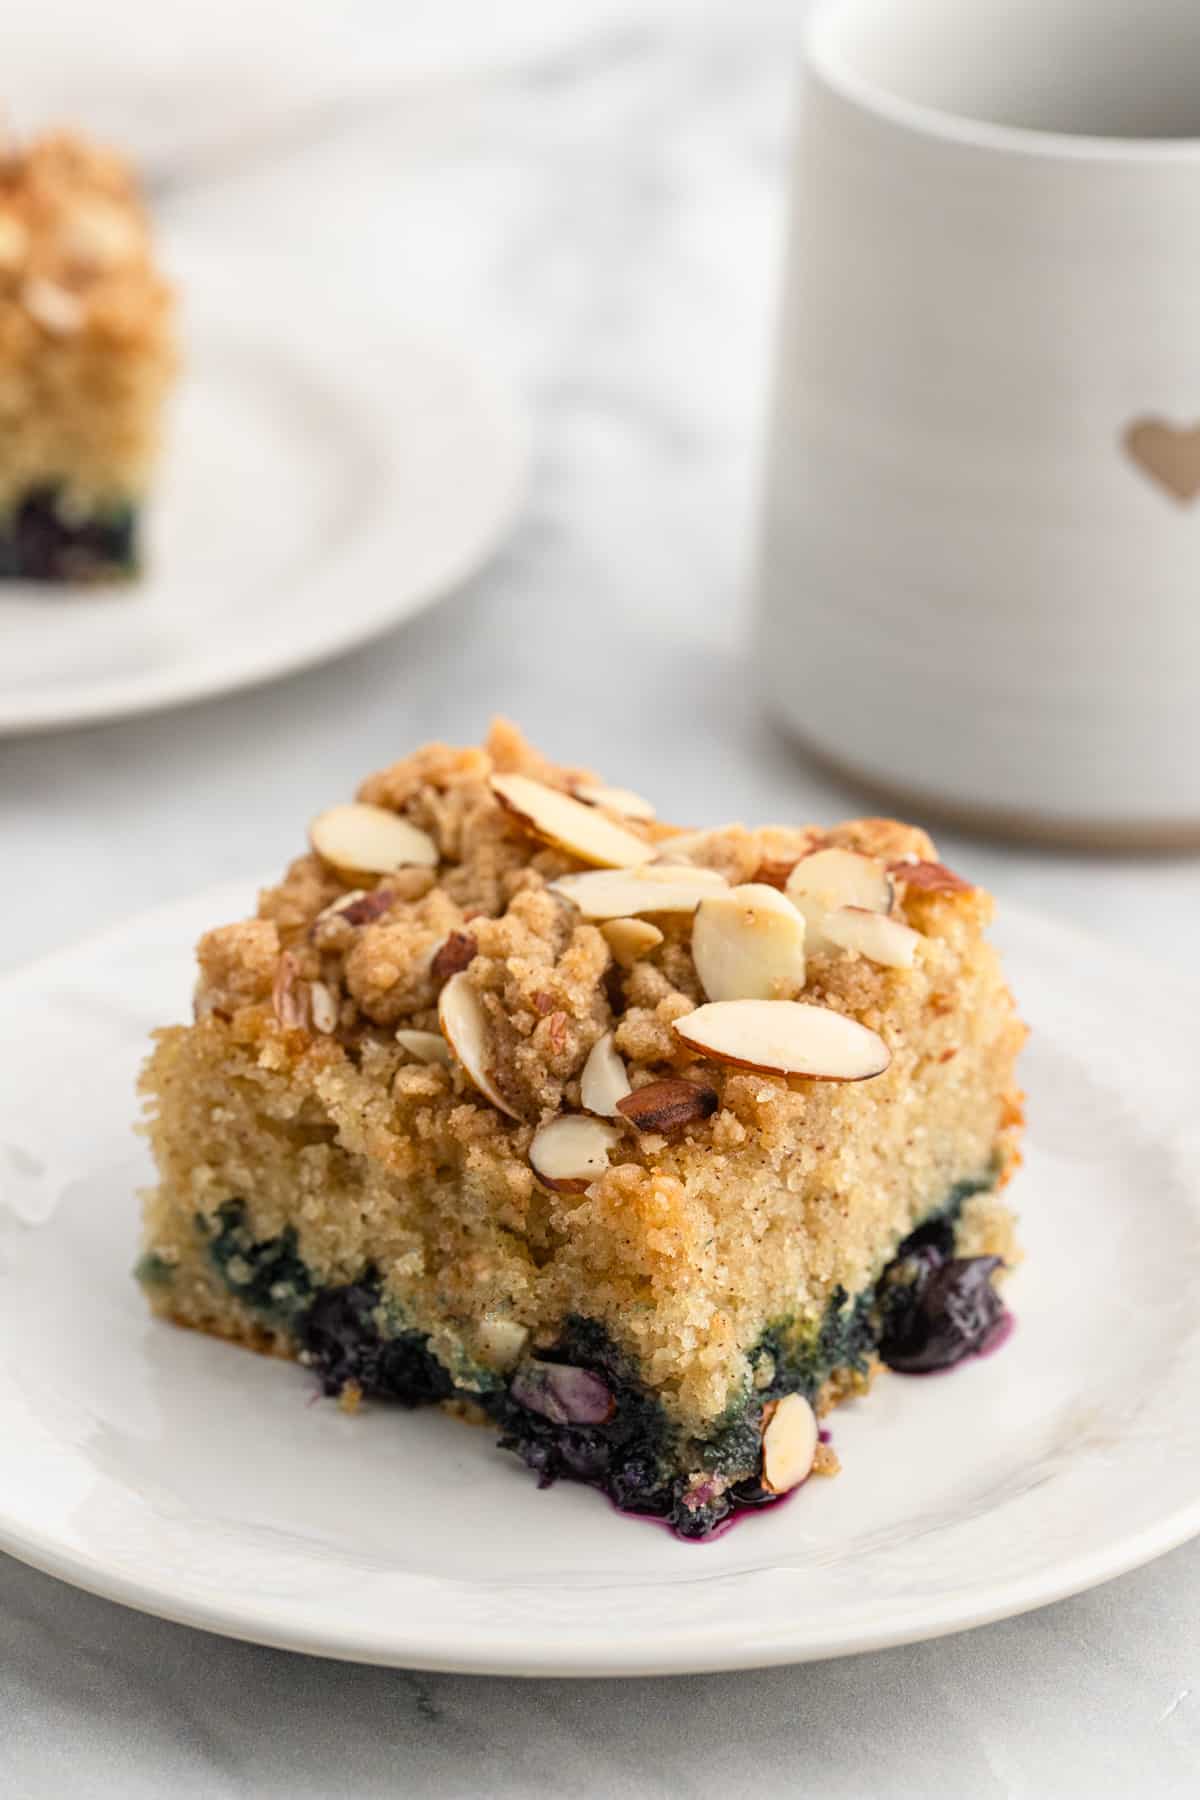 A slice of blueberry crunch cake on. white plate